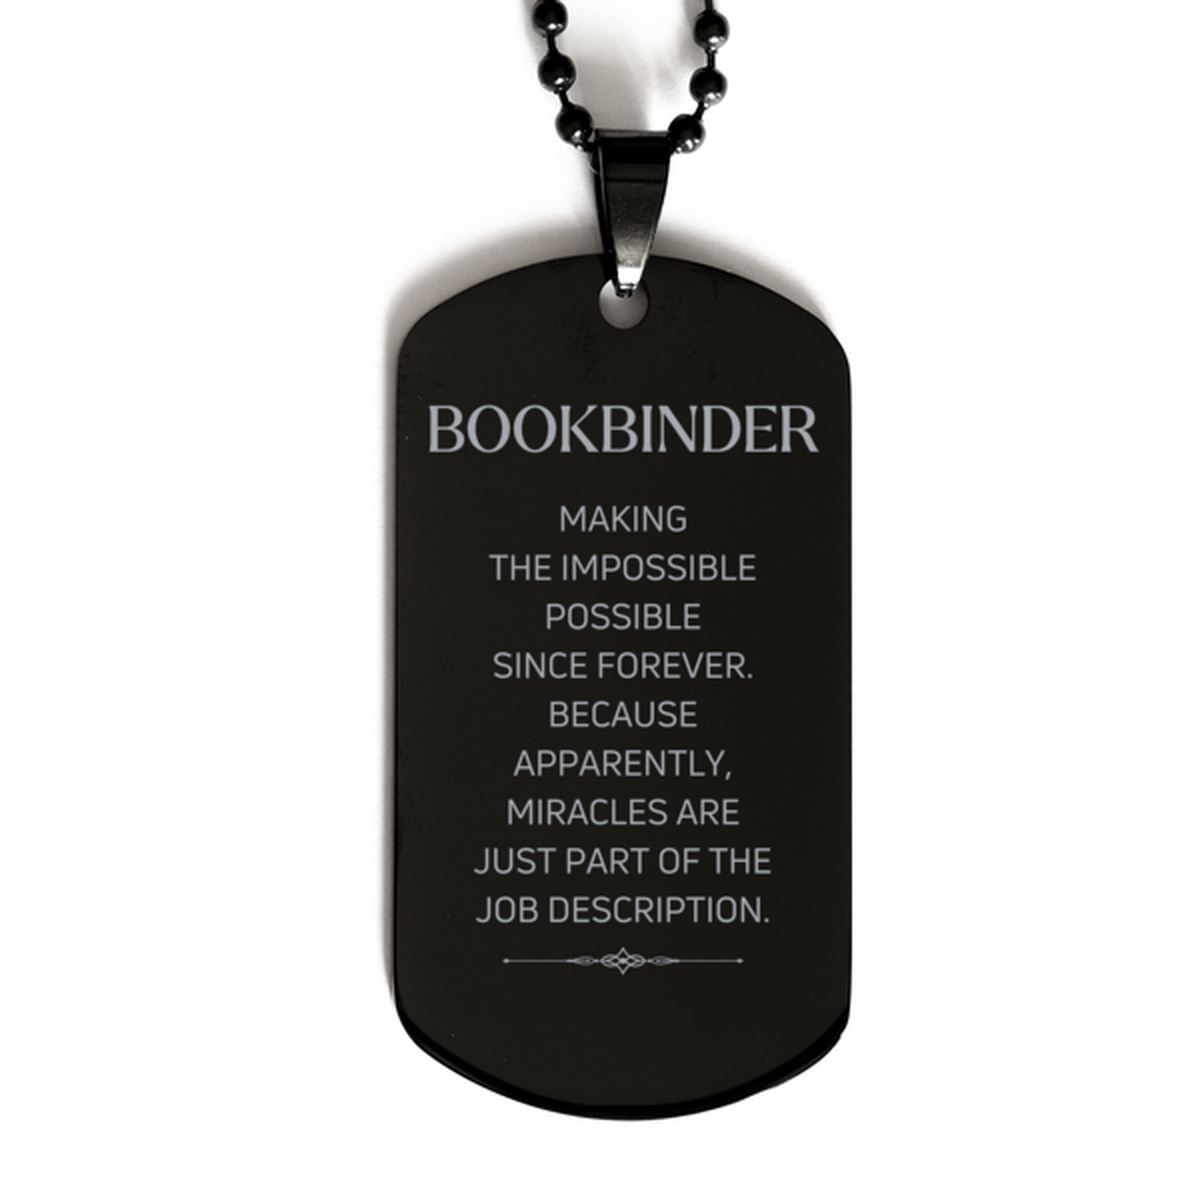 Funny Bookbinder Gifts, Miracles are just part of the job description, Inspirational Birthday Black Dog Tag For Bookbinder, Men, Women, Coworkers, Friends, Boss